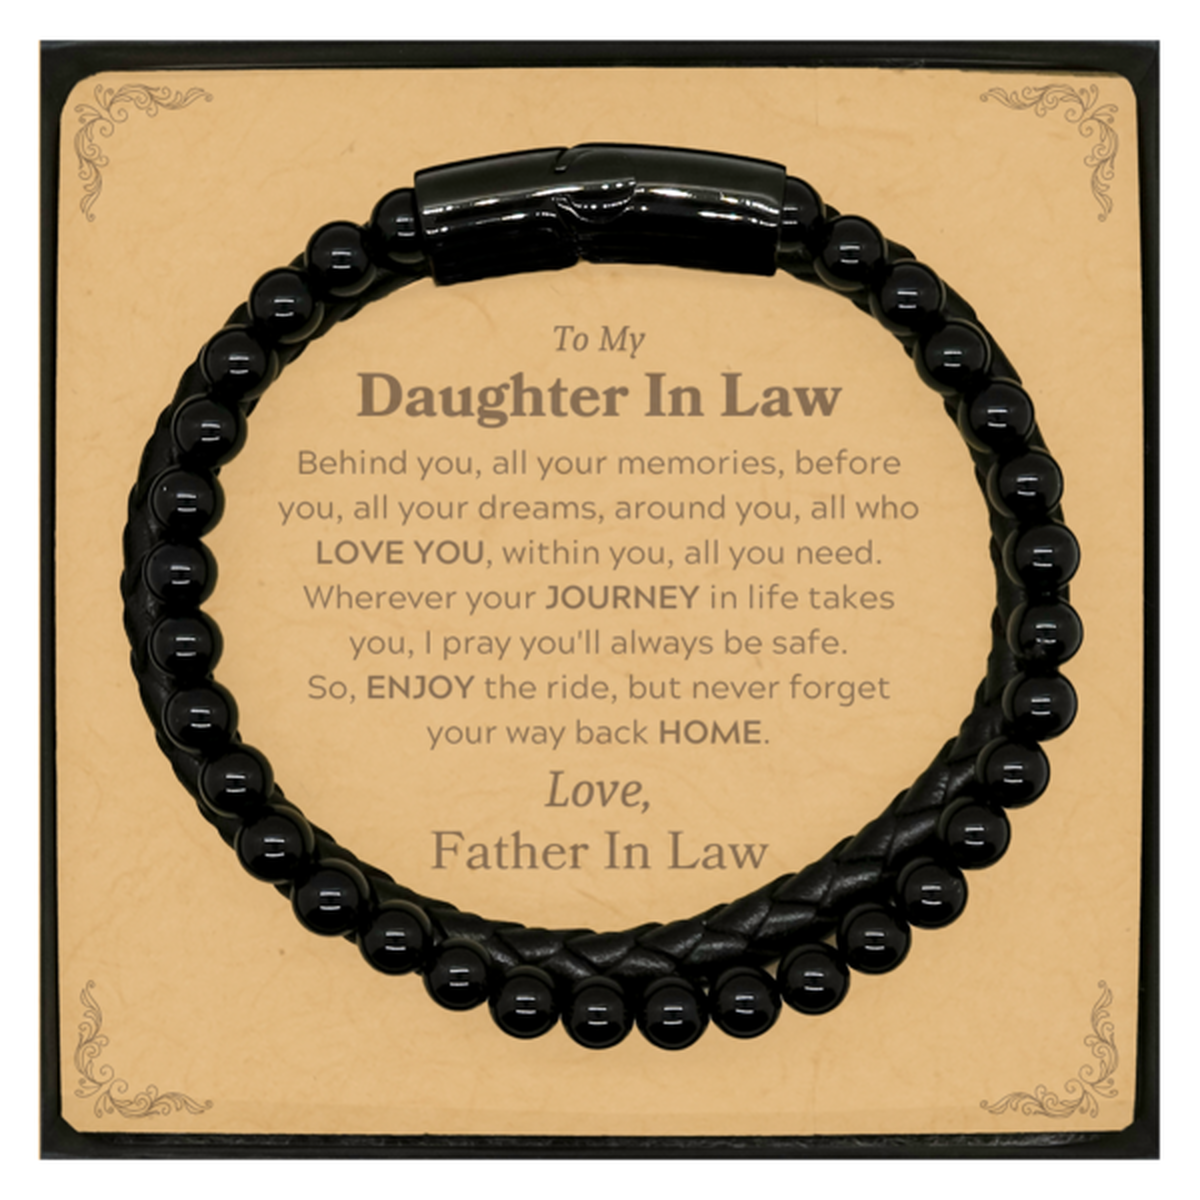 To My Daughter In Law Graduation Gifts from Father In Law, Daughter In Law Stone Leather Bracelets Christmas Birthday Gifts for Daughter In Law Behind you, all your memories, before you, all your dreams. Love, Father In Law